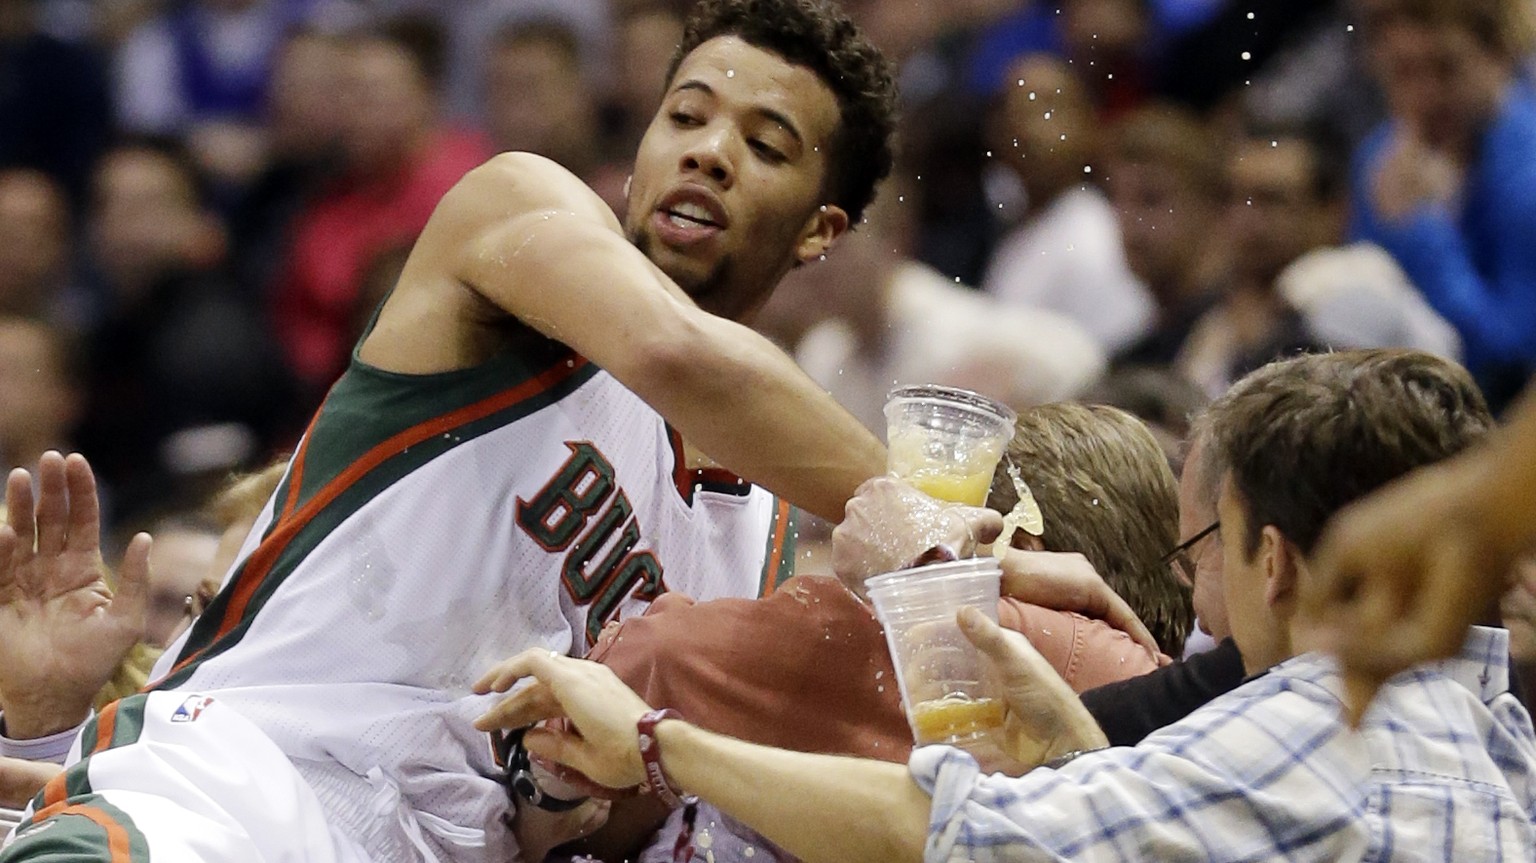 Fans spill their drinks as Milwaukee Bucks&#039; Michael Carter-Williams dives to save a ball from going out of bounds during the second half of an NBA basketball game against the Boston Celtics Wedne ...